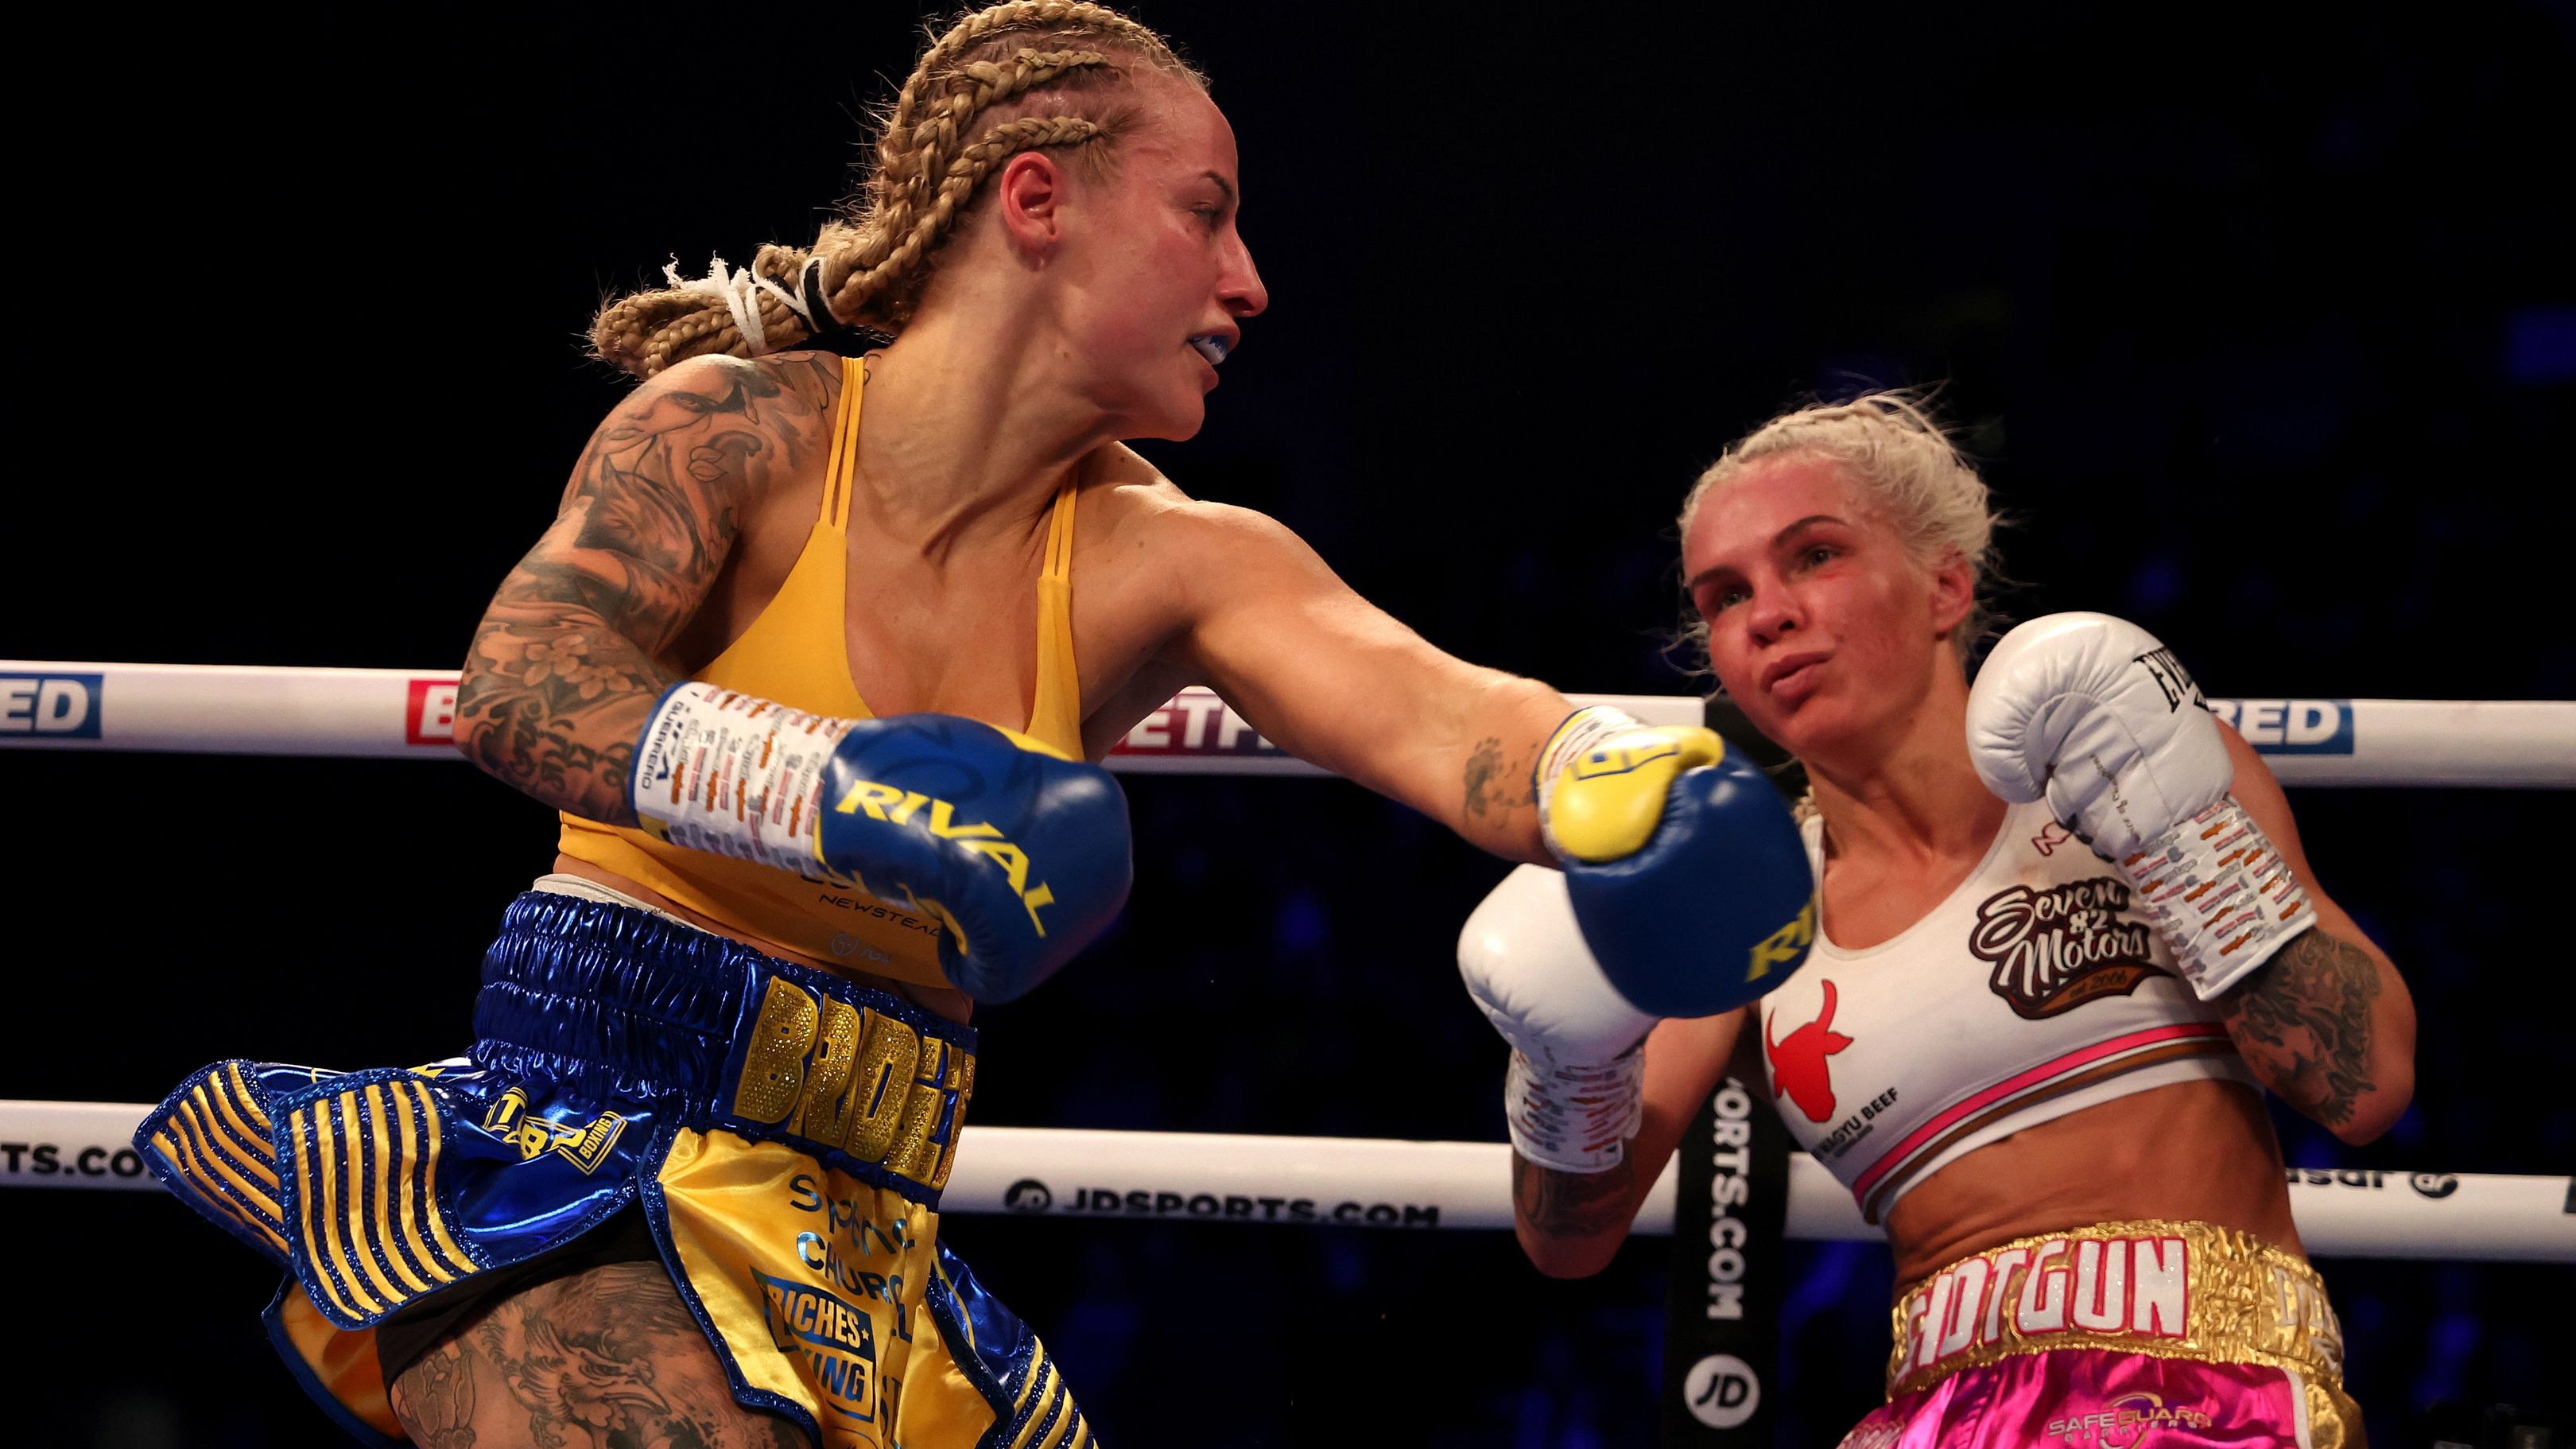 Ebanie Bridges and Shannon OConnell exchange blows during their IBF Women&#x27;s World Bantamweight title fight at First Direct Arena in Leeds. (Photo by Nigel Roddis/Getty Images)